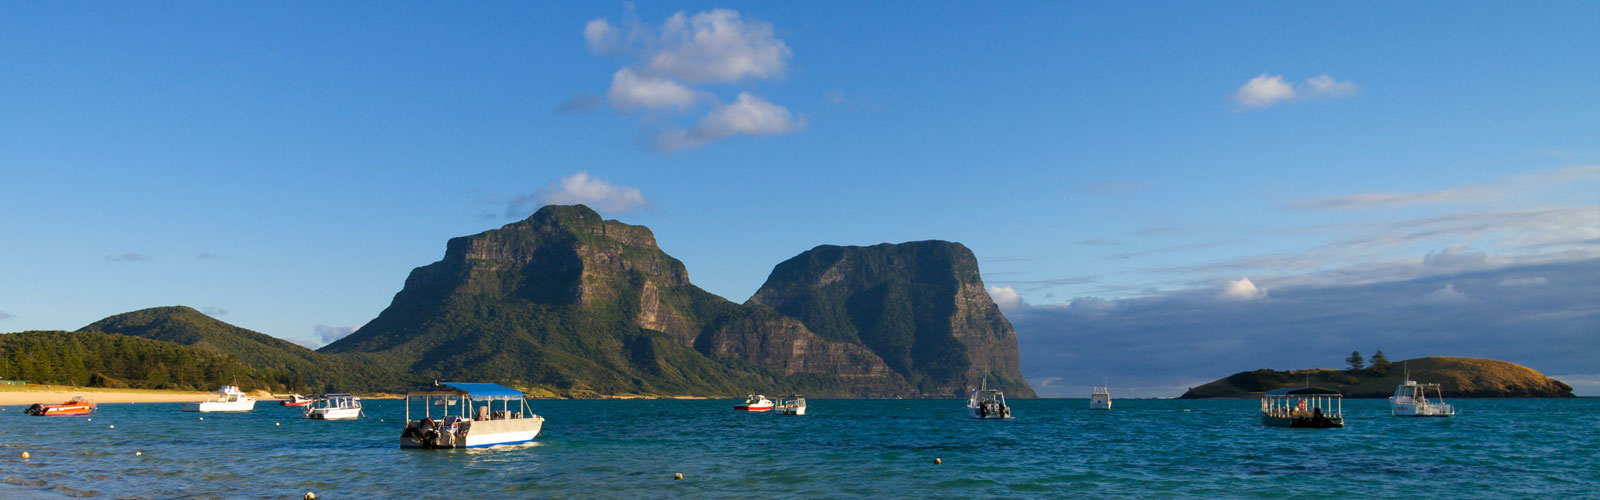 Boat Tours on Lord Howe Island